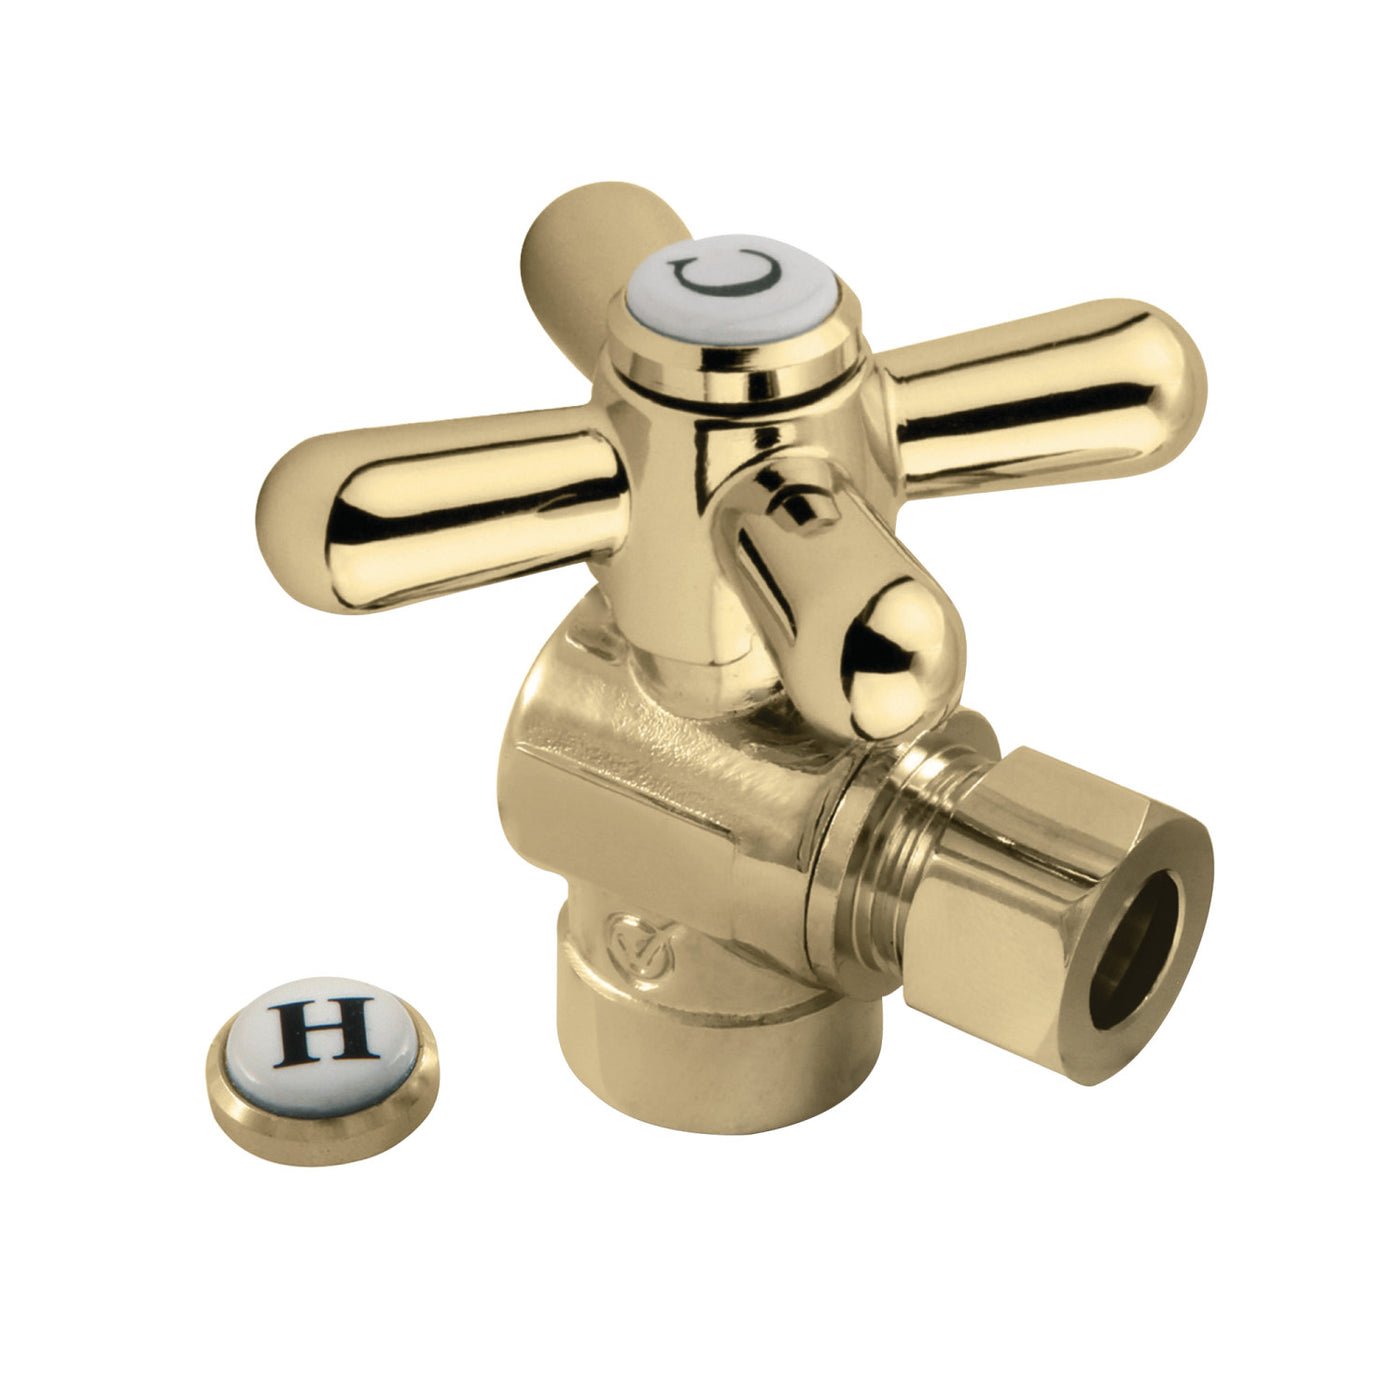 Elements of Design ECC43202X 1/2-Inch Sweat x 3/8-Inch OD Comp Angle Stop Valve, Polished Brass